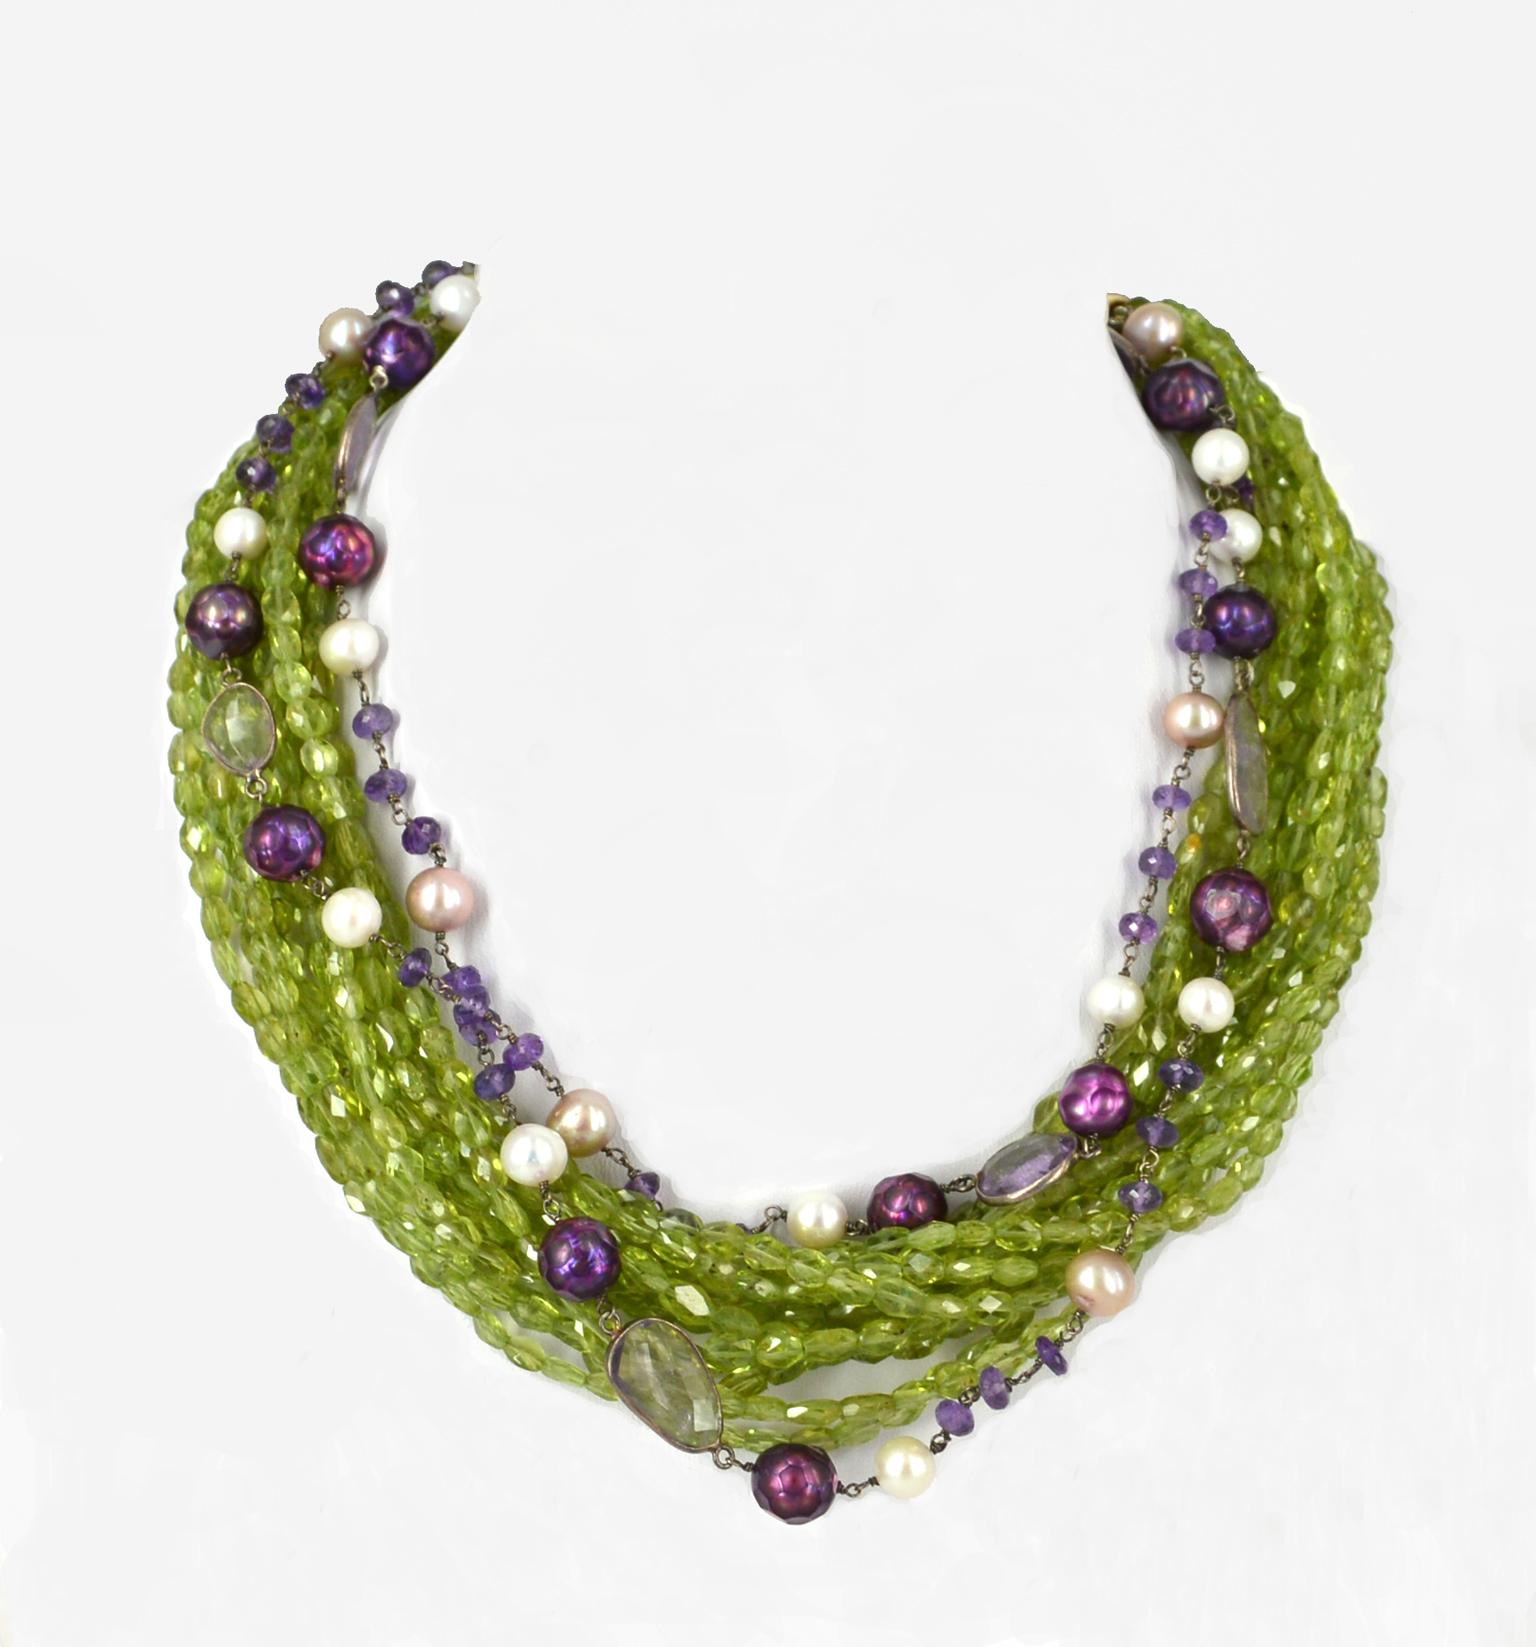 11 strands of faceted peridot 6x4mm beads with 2 strands of hand made link chain with Amethyst and Fresh Water Pearls finished with Gold plate Sterling Silver dome cap and 27mm hook clasp with a 10cm 14k Gold filled extension chain.
Total length of